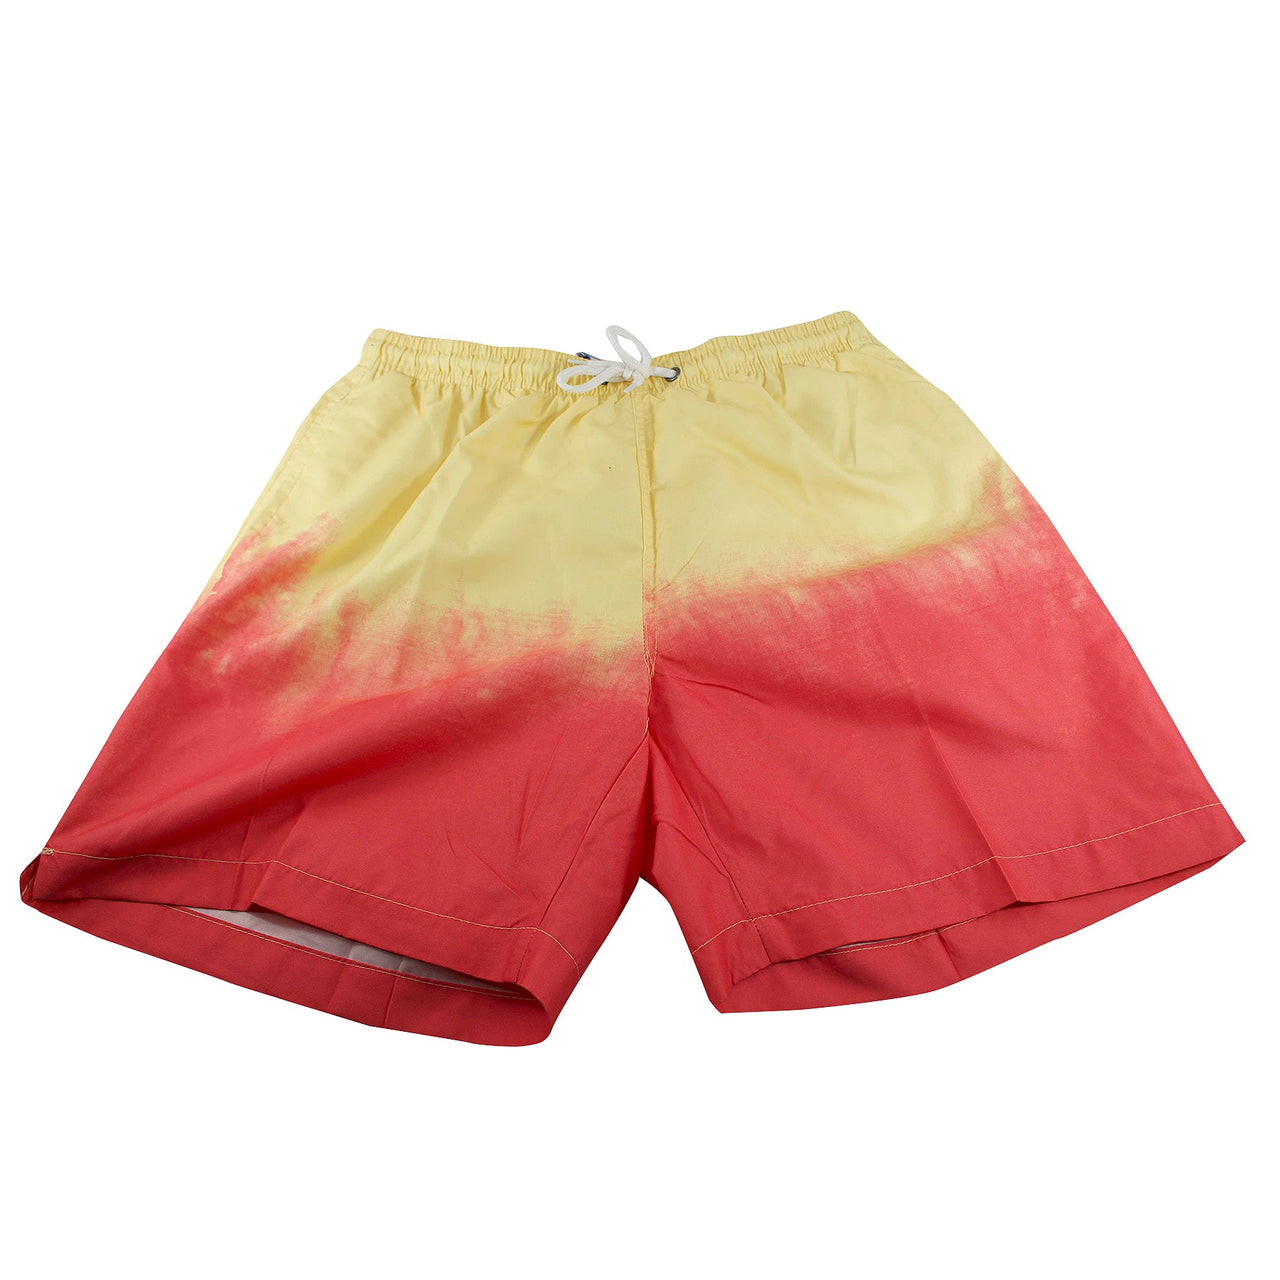 The coral reef dip dyed swim trunks go from light yellow to coral